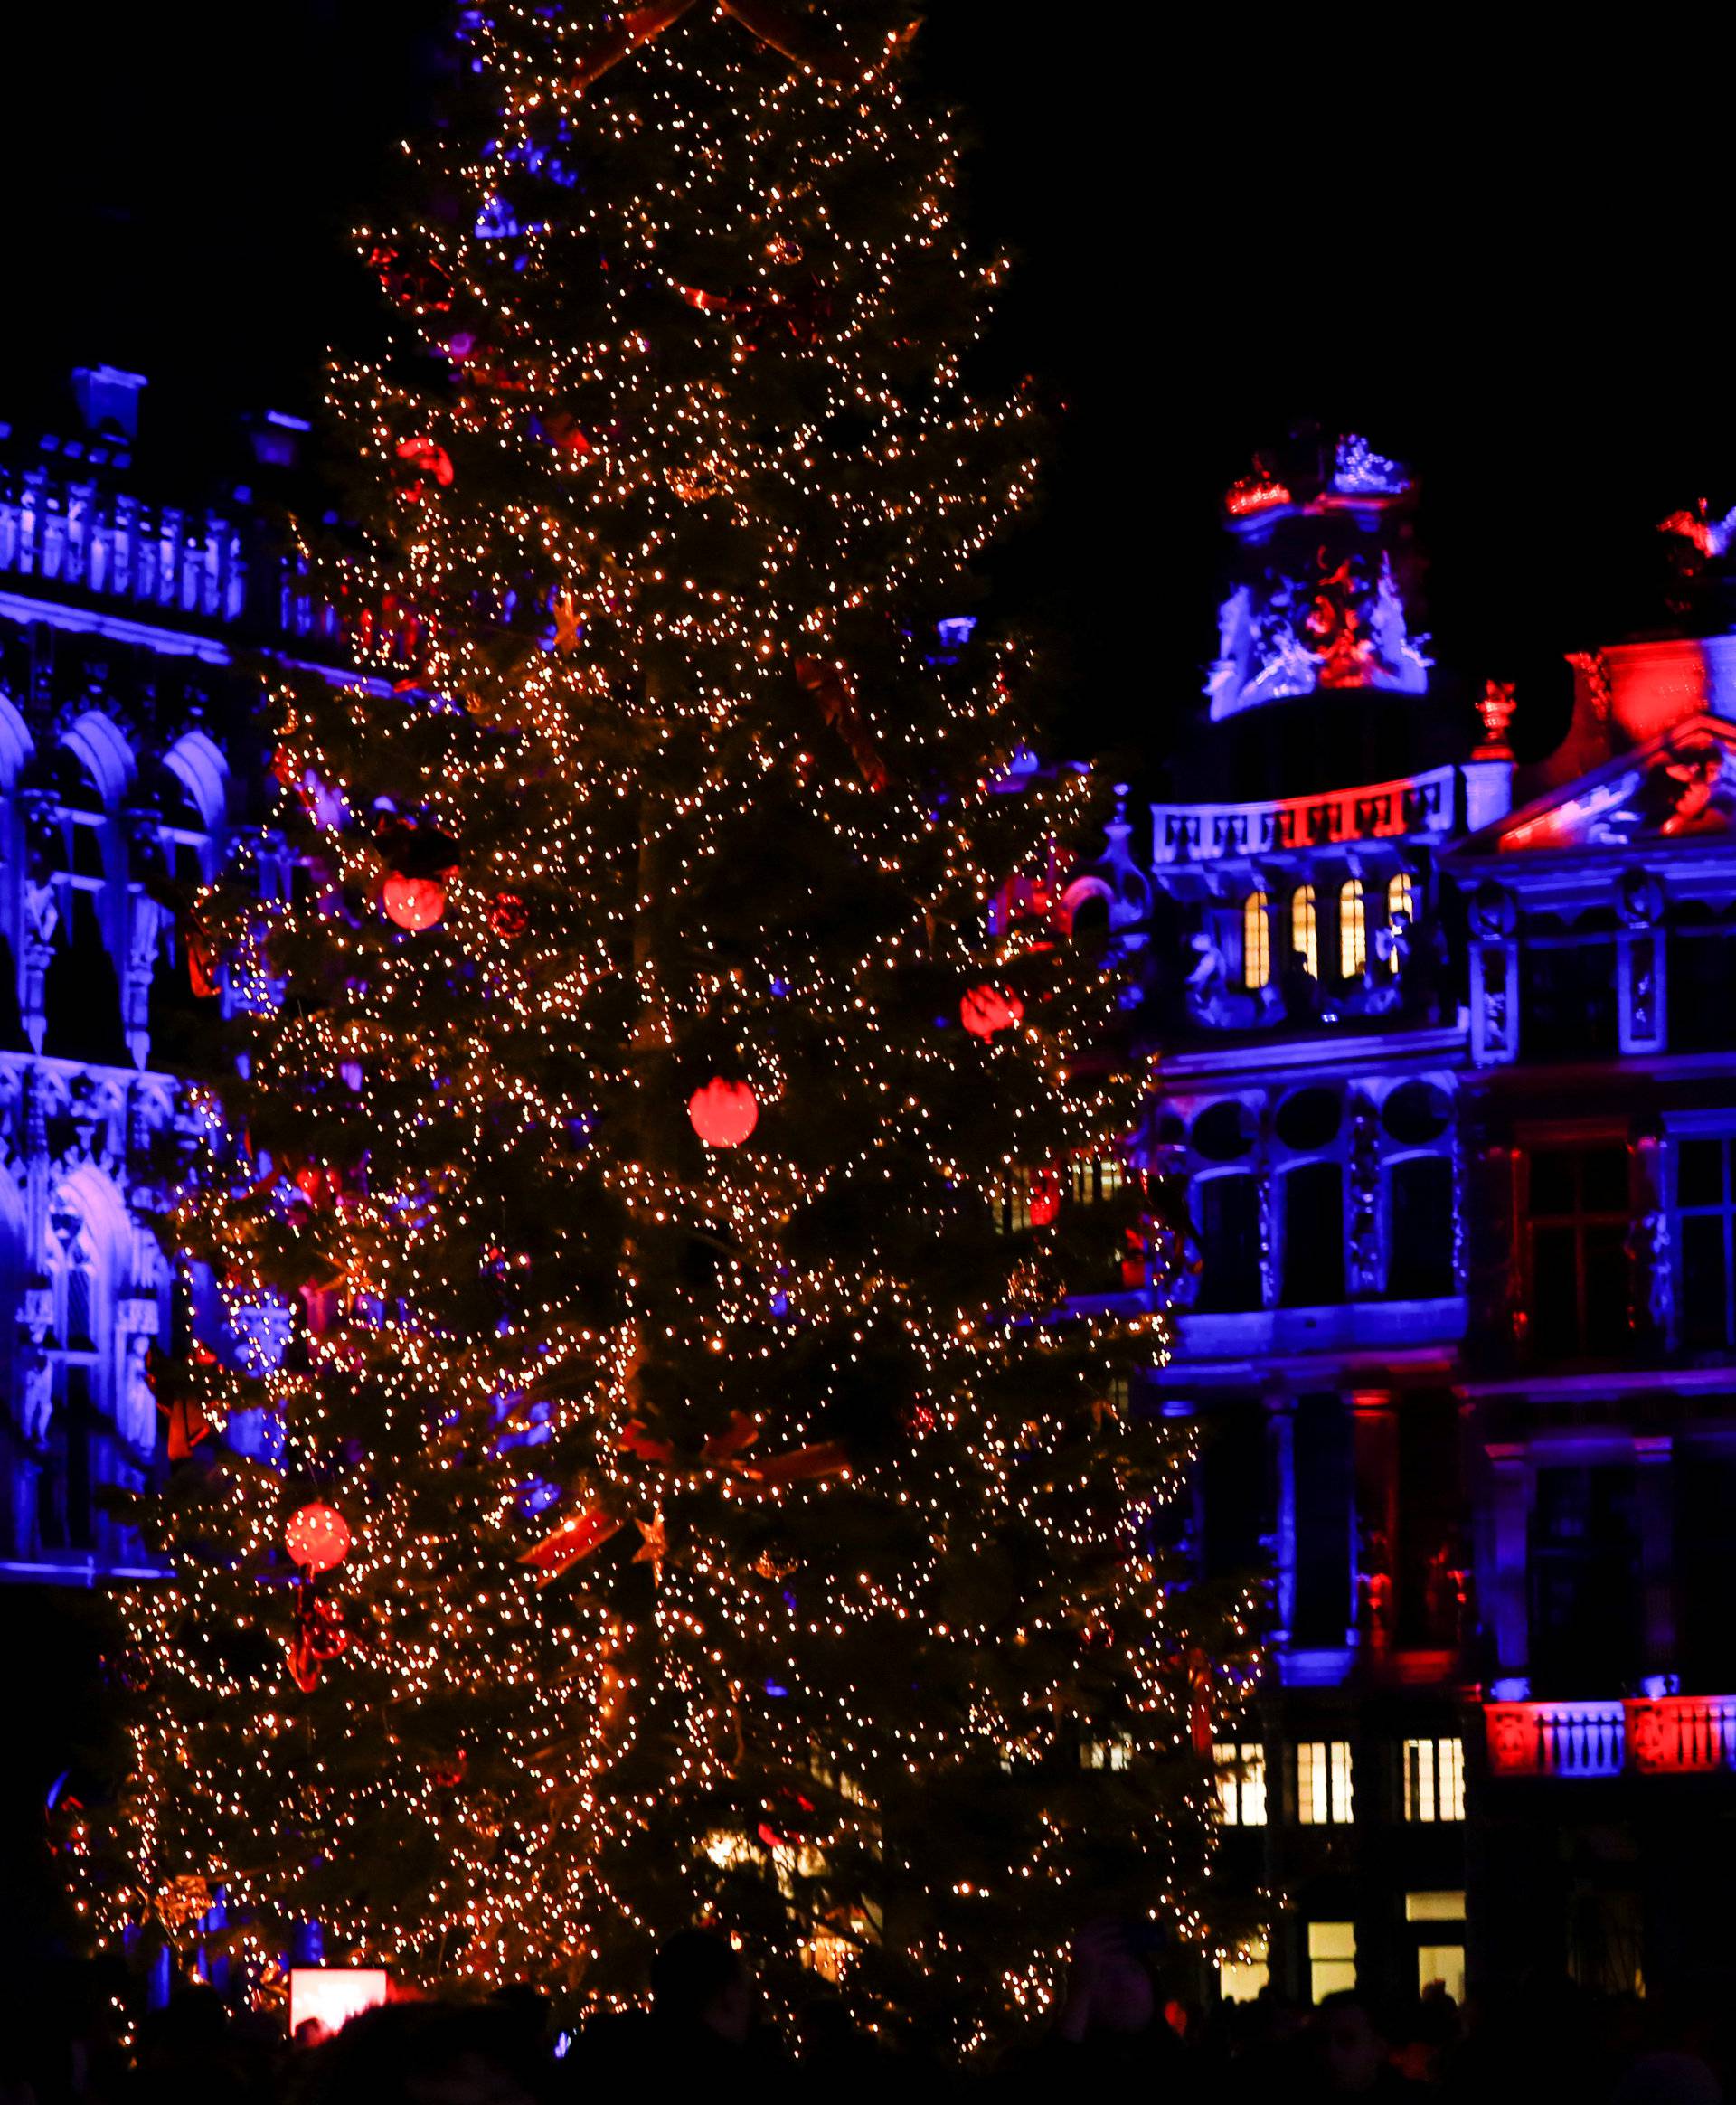 Brussels' Grand Place is illuminated during a light show as part as the Christmas "Winter Wonders" festivities in central Brussels